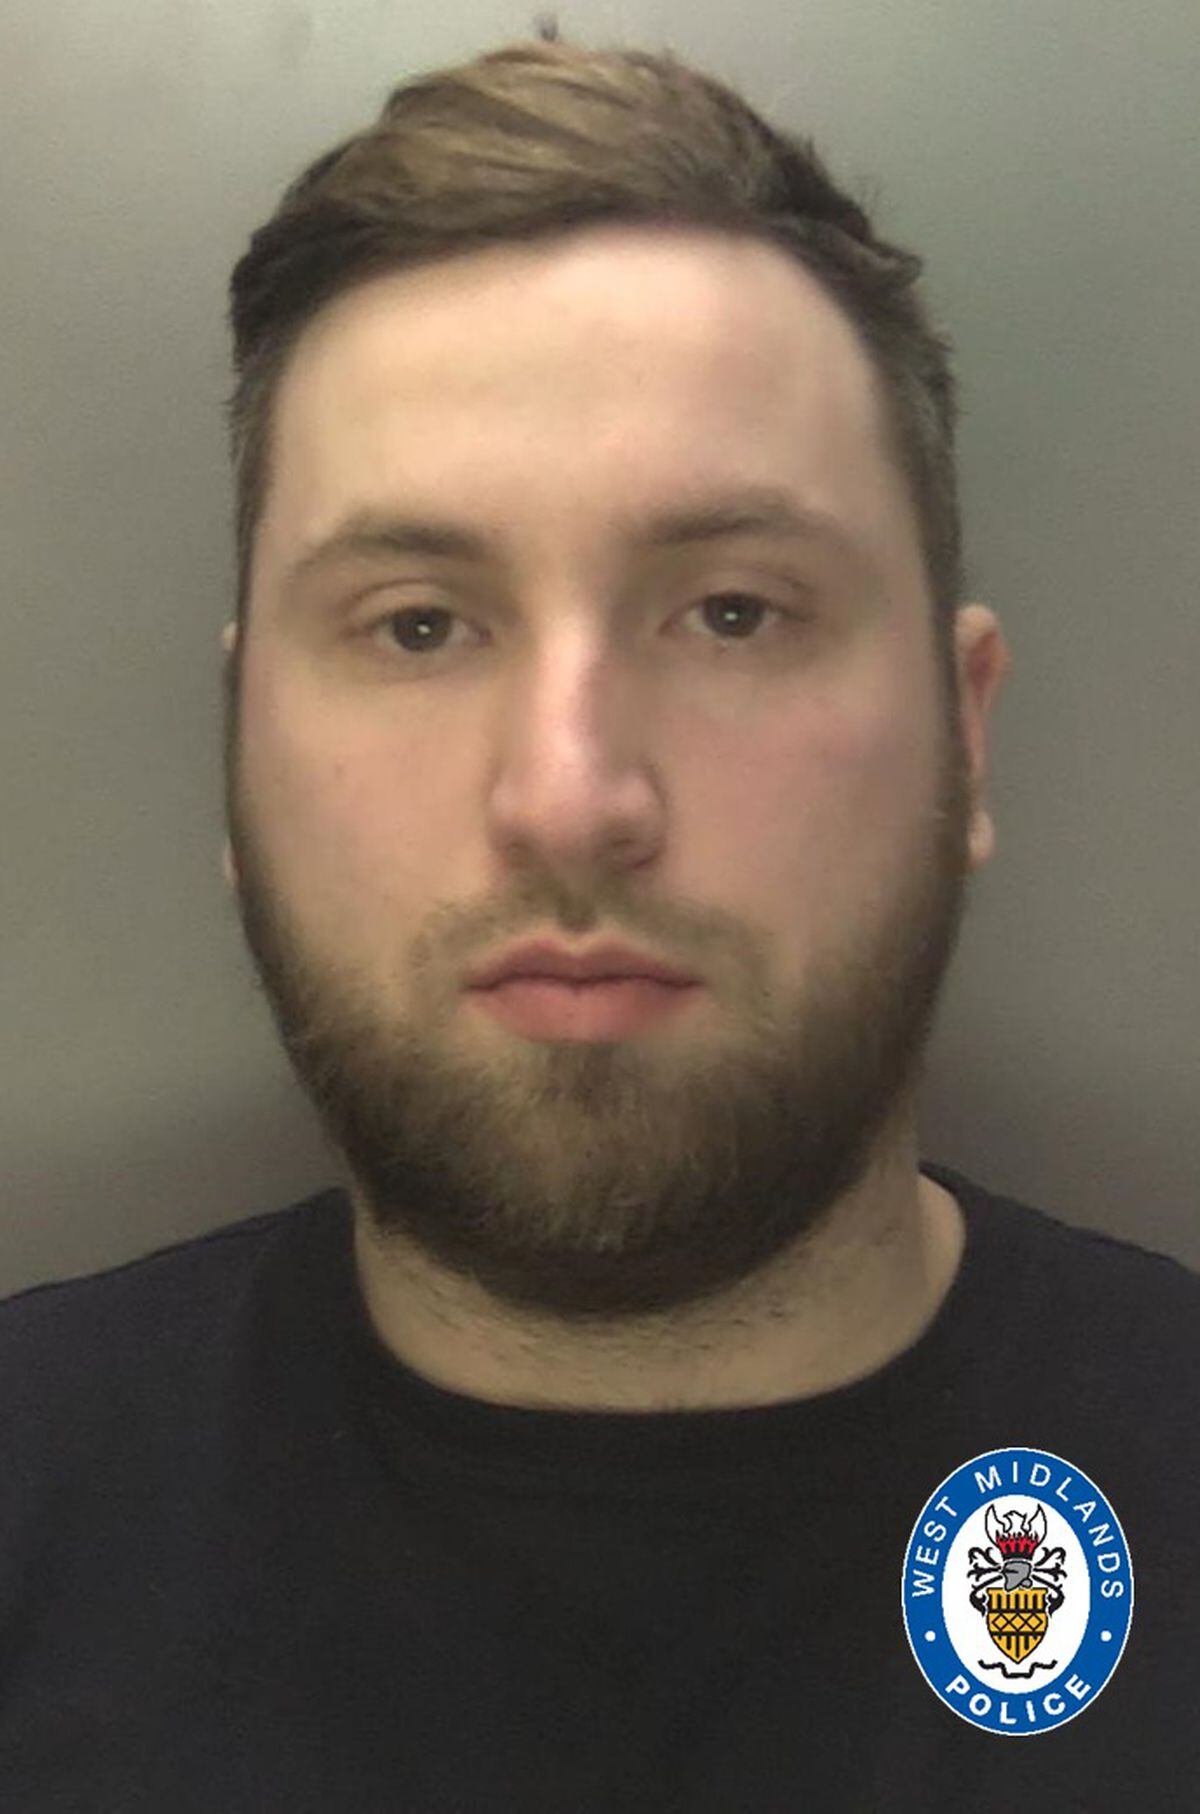 David Biddell-Portman has been jailed for five years for using a 3D printer to manufacture weapons.